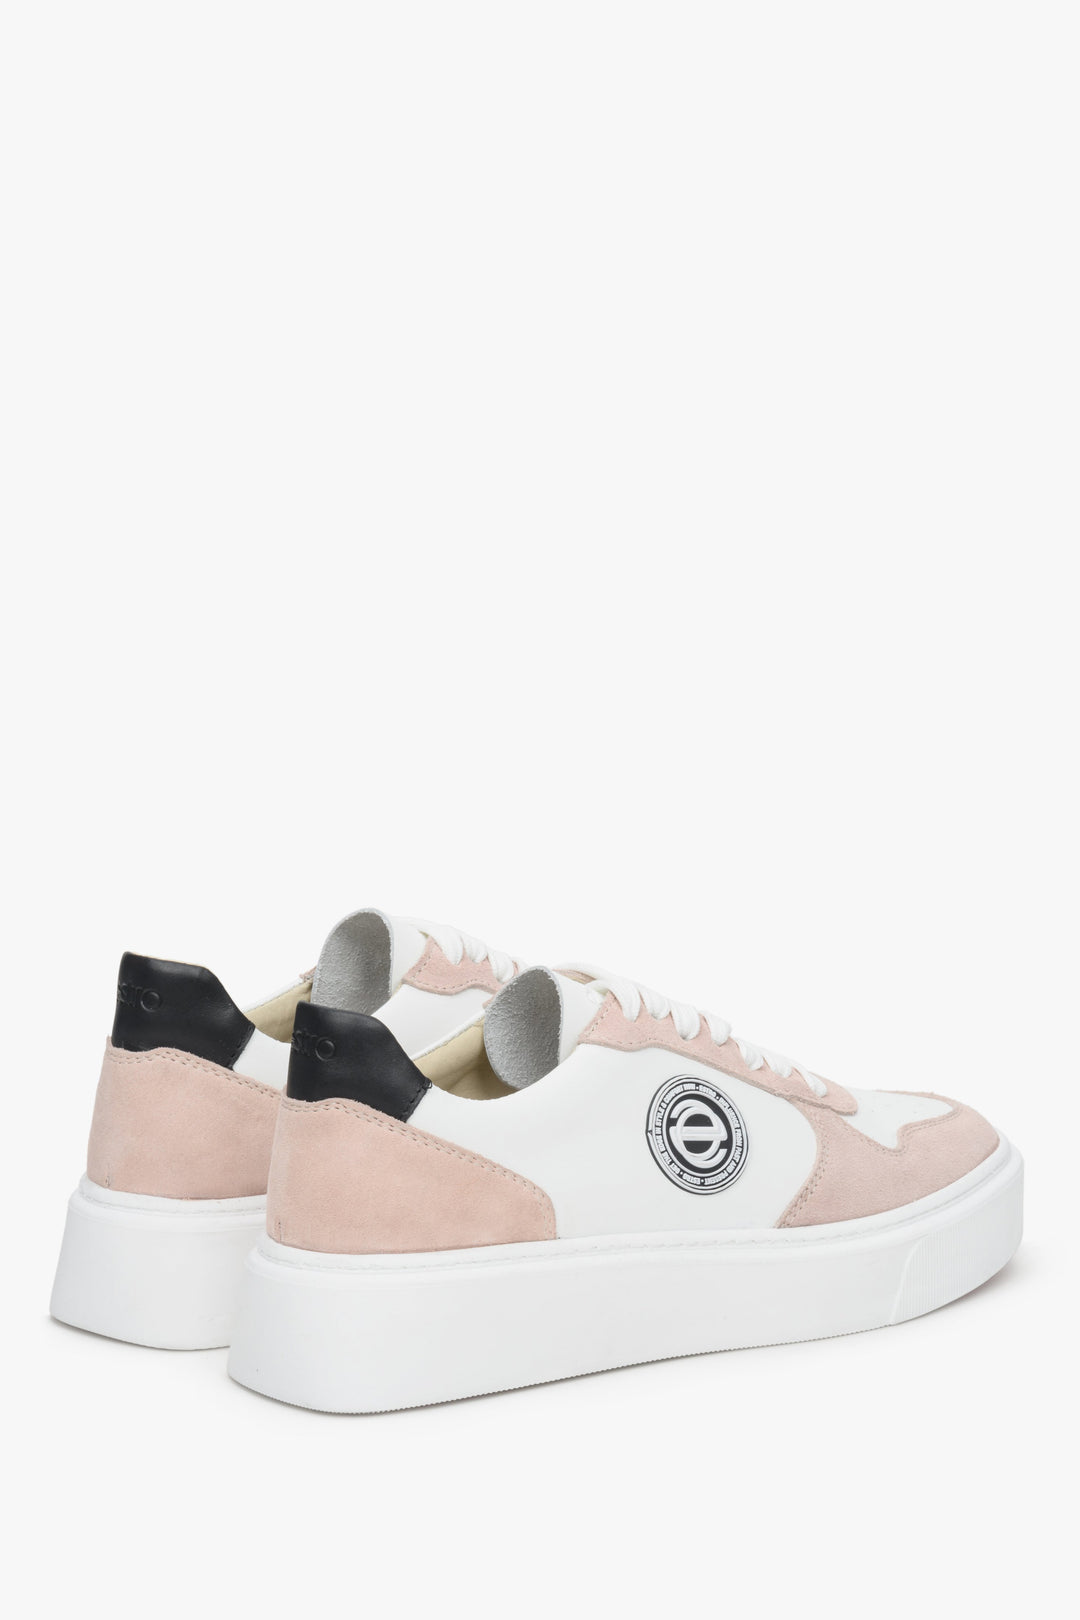 White and pink soft and comfortable Estro women's sneakers in leather and velour - close-up of the side seam and heel counter.